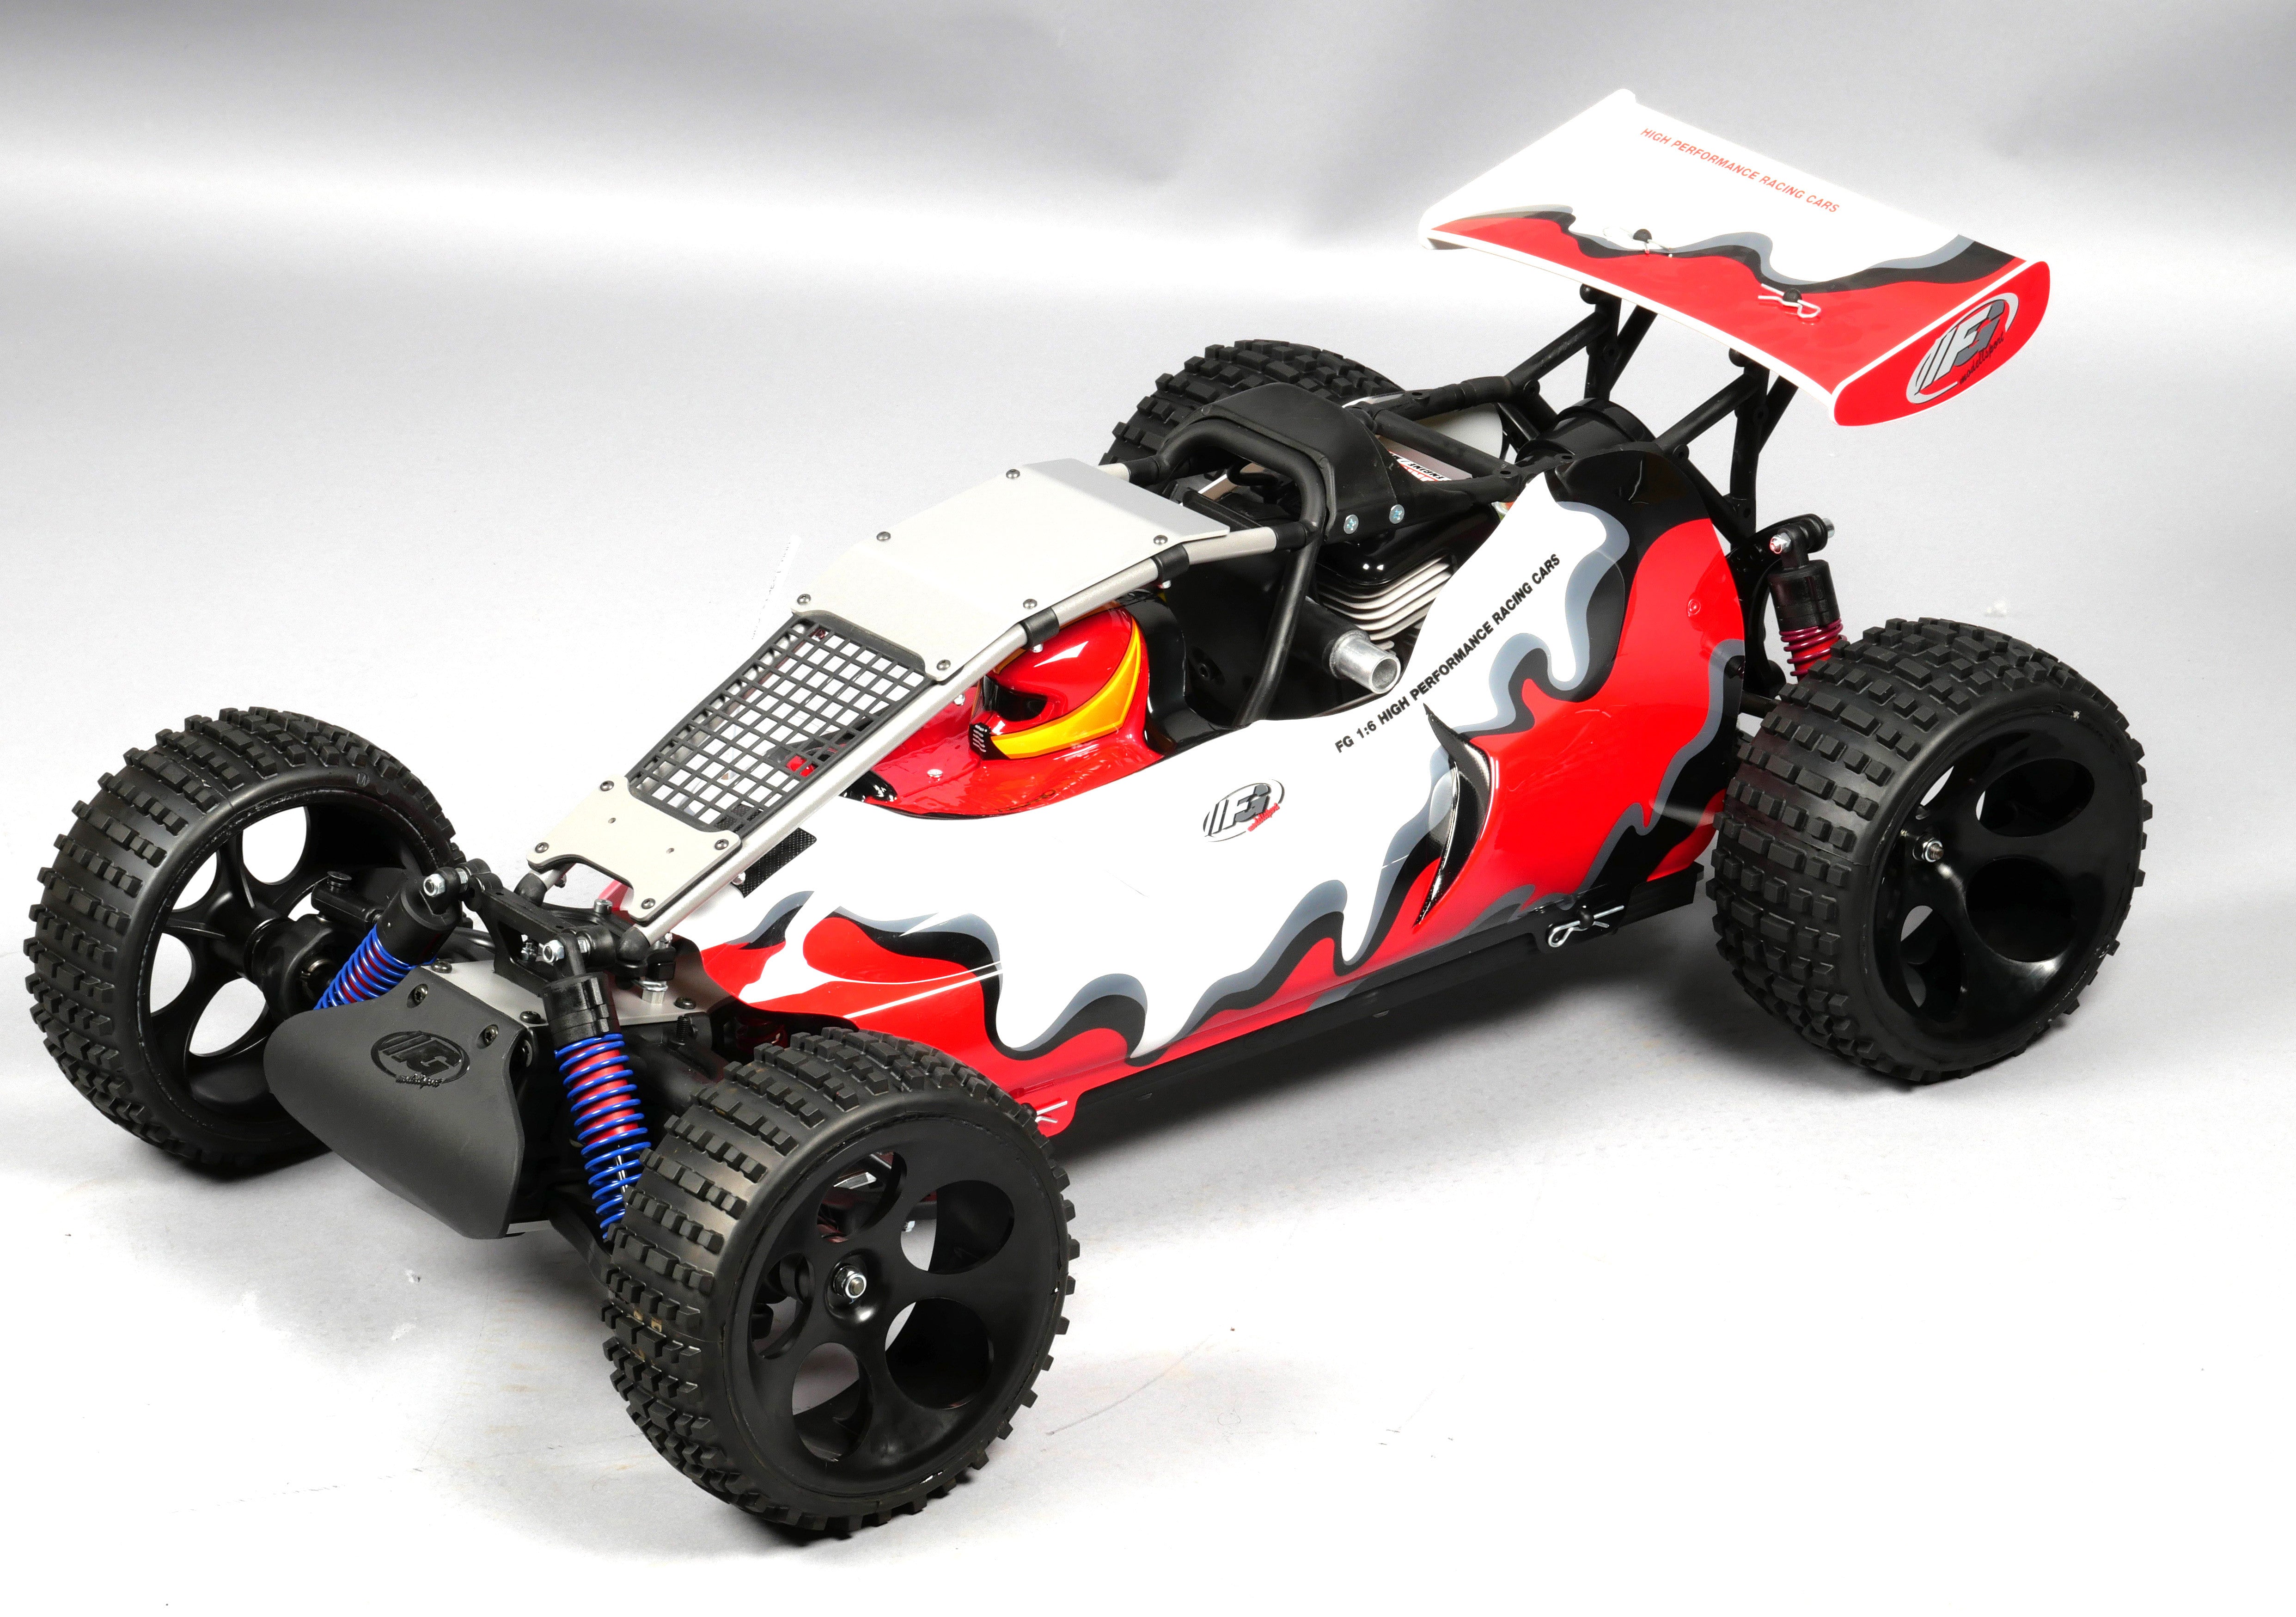 T2M Pirate Nitron II buggy 1/10 thermique XL